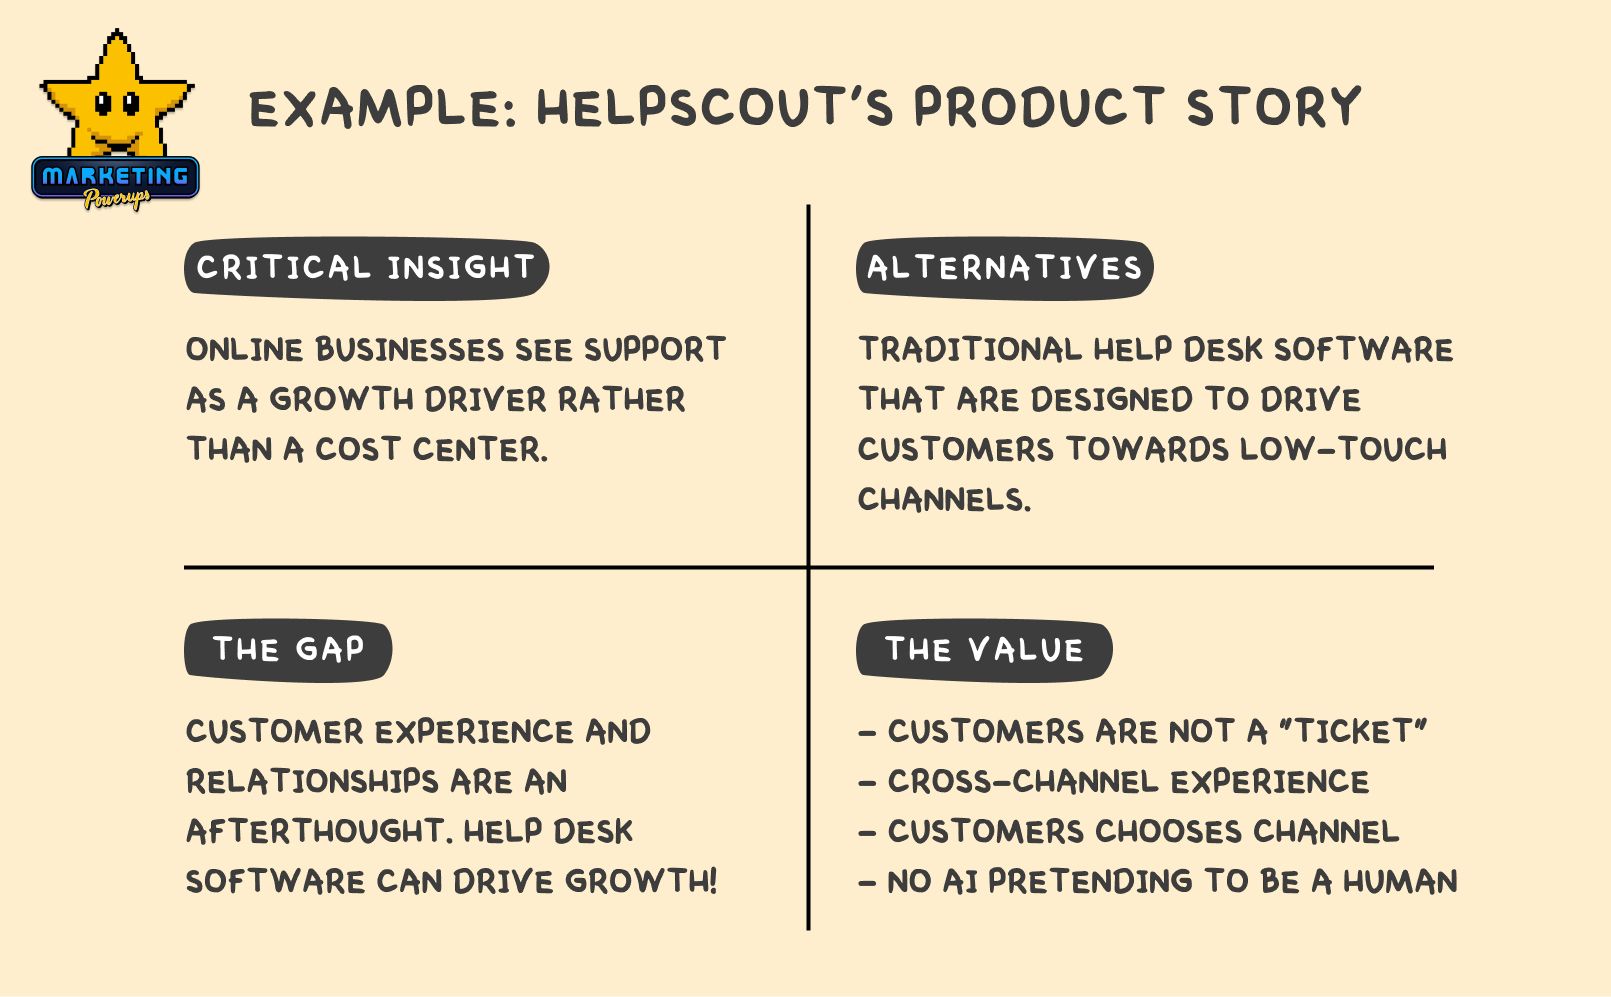 HelpScout's product story